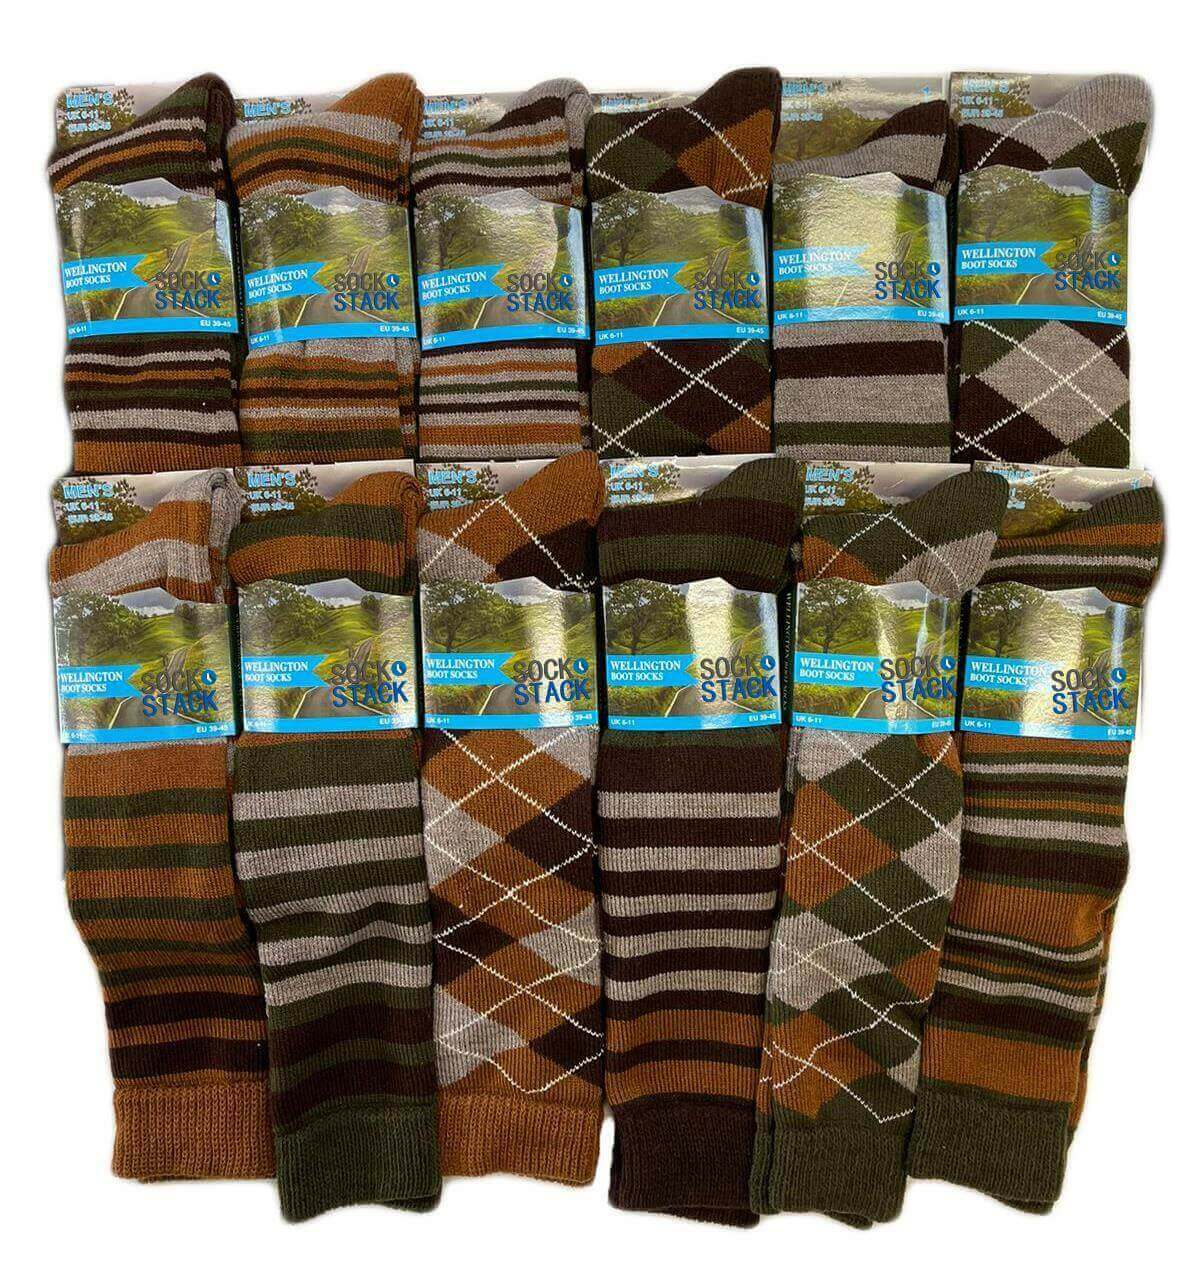 Pack Of 3 Men's Wellington Socks Acrylic Thermal Welly Boot Sock. Buy now for £10.00. A Socks by Sock Stack. 6-11, acrylic, anti bacterial, anti blister, argyle, argyle diamond, assorted, boot, comfortable, elastane, hiking, mens, mens socks, outdoor, pol